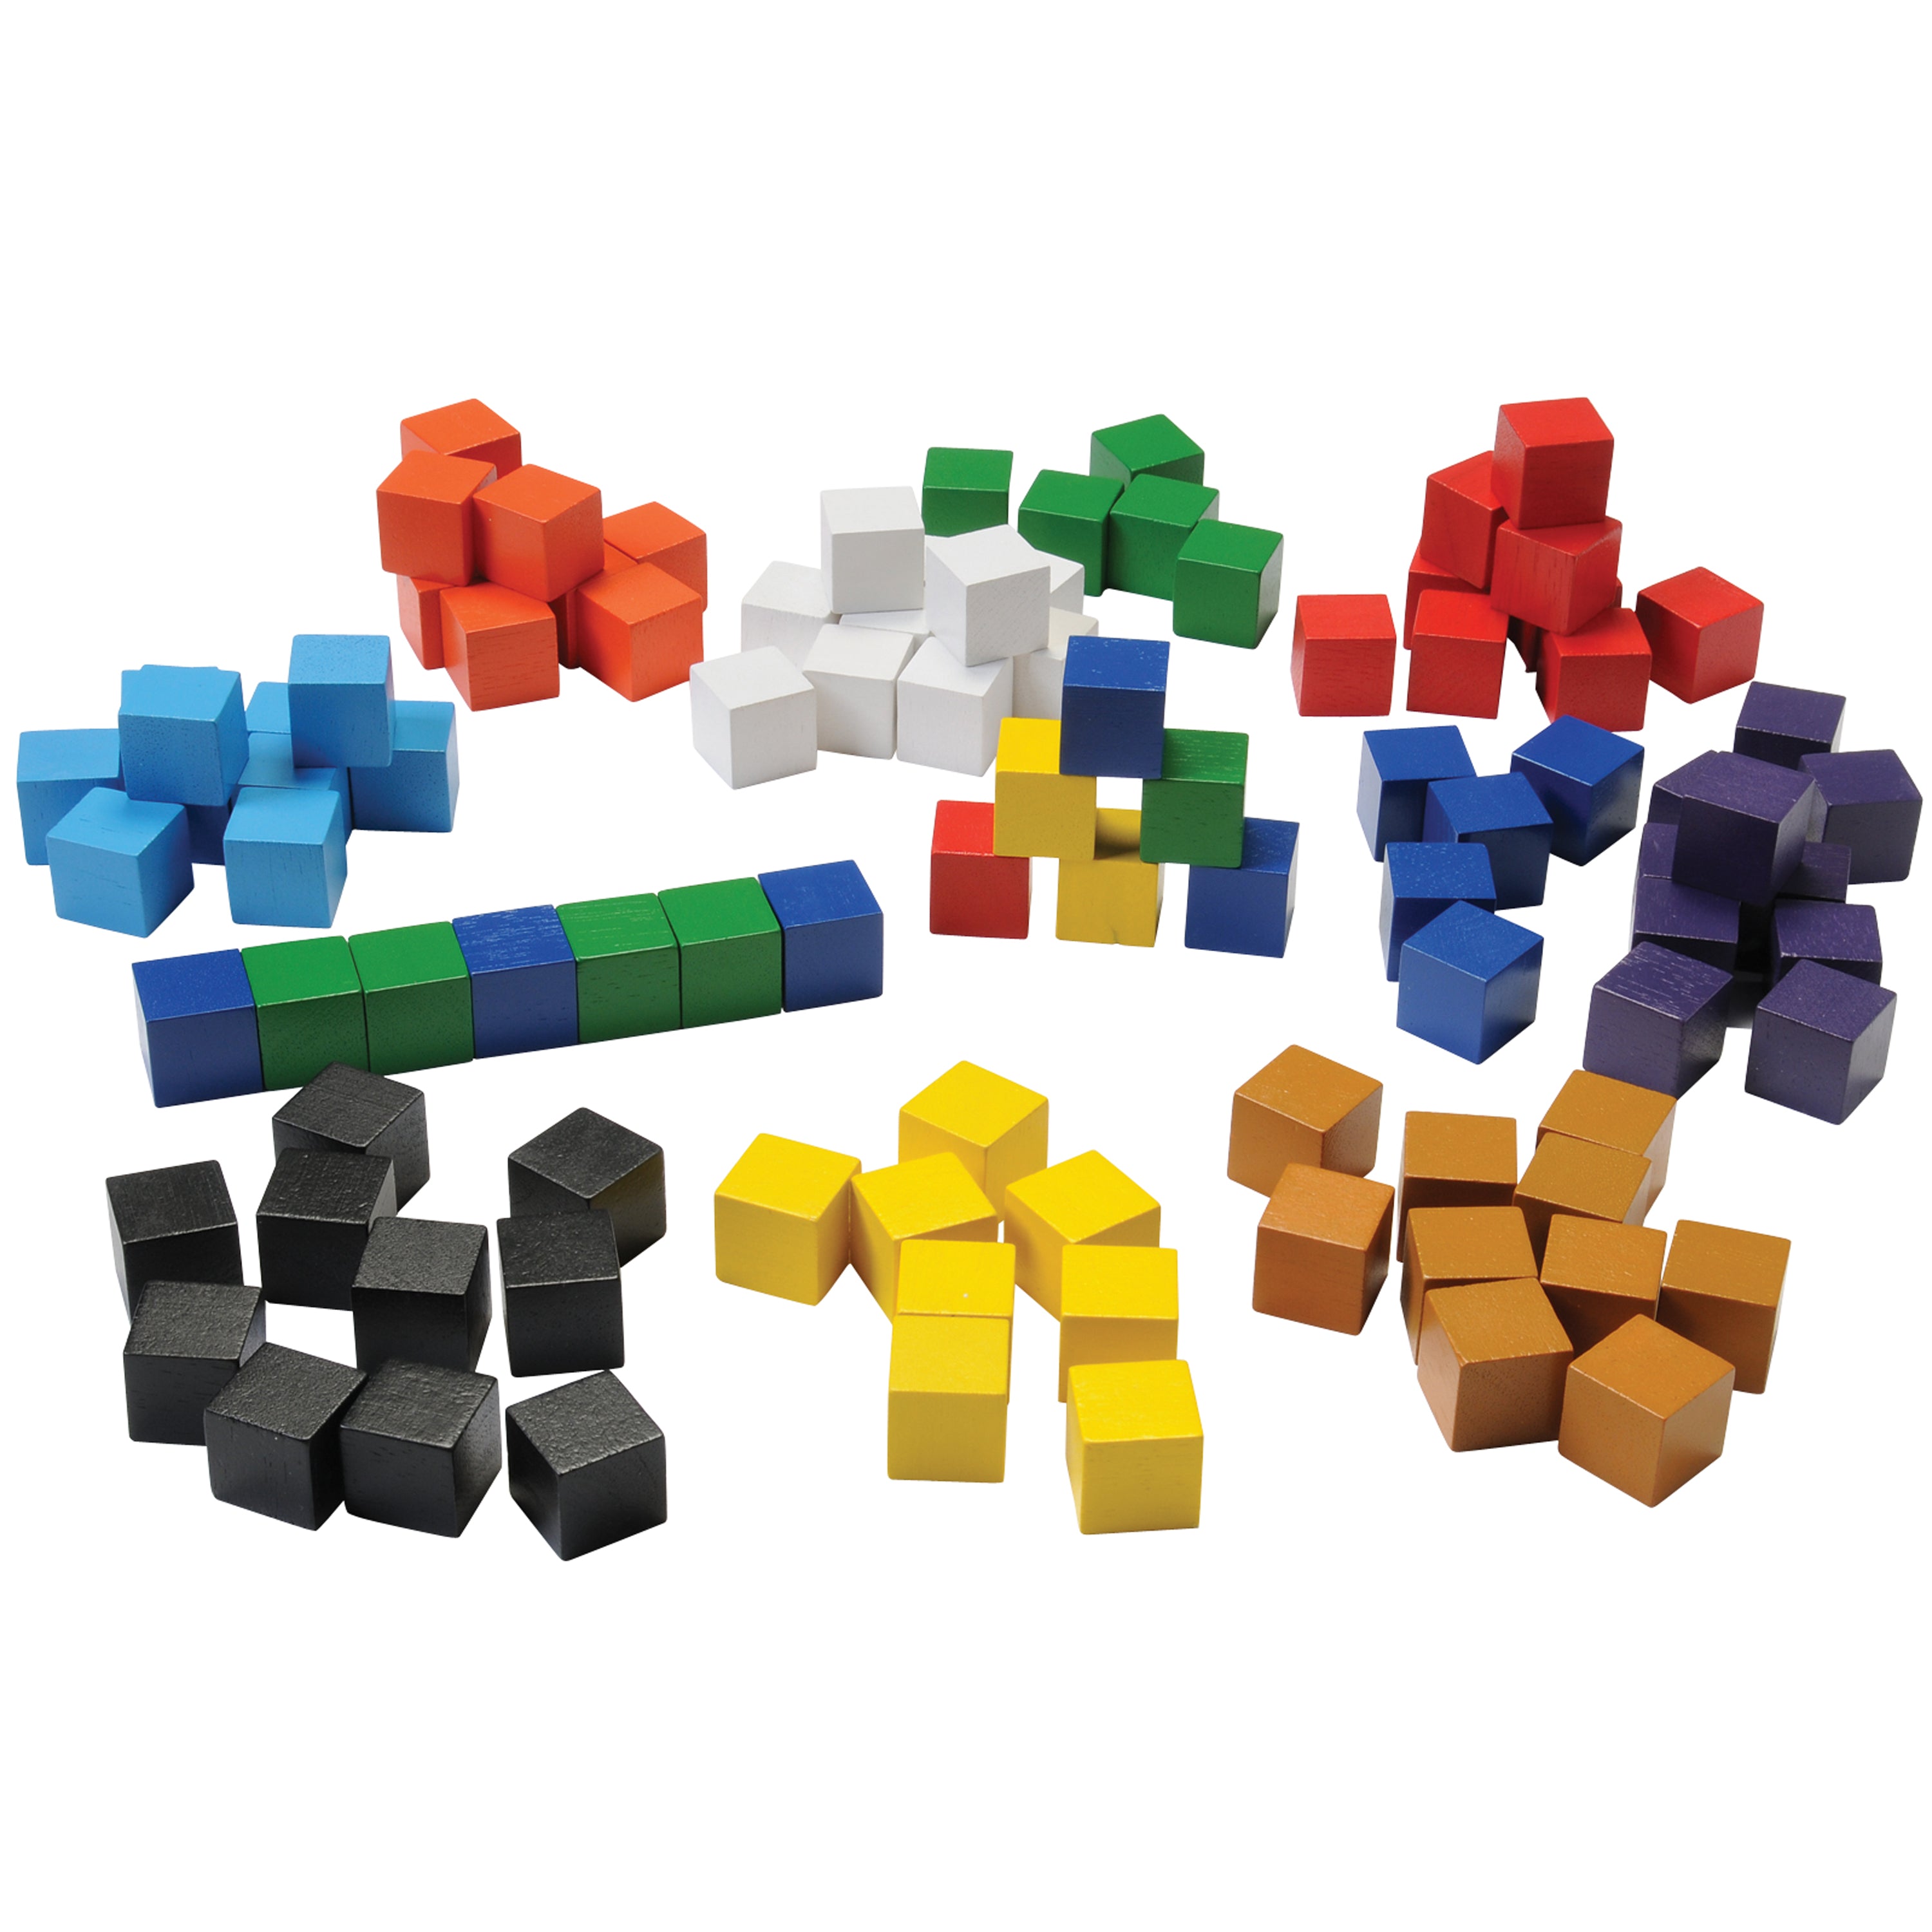 Cubical Counting Blocks